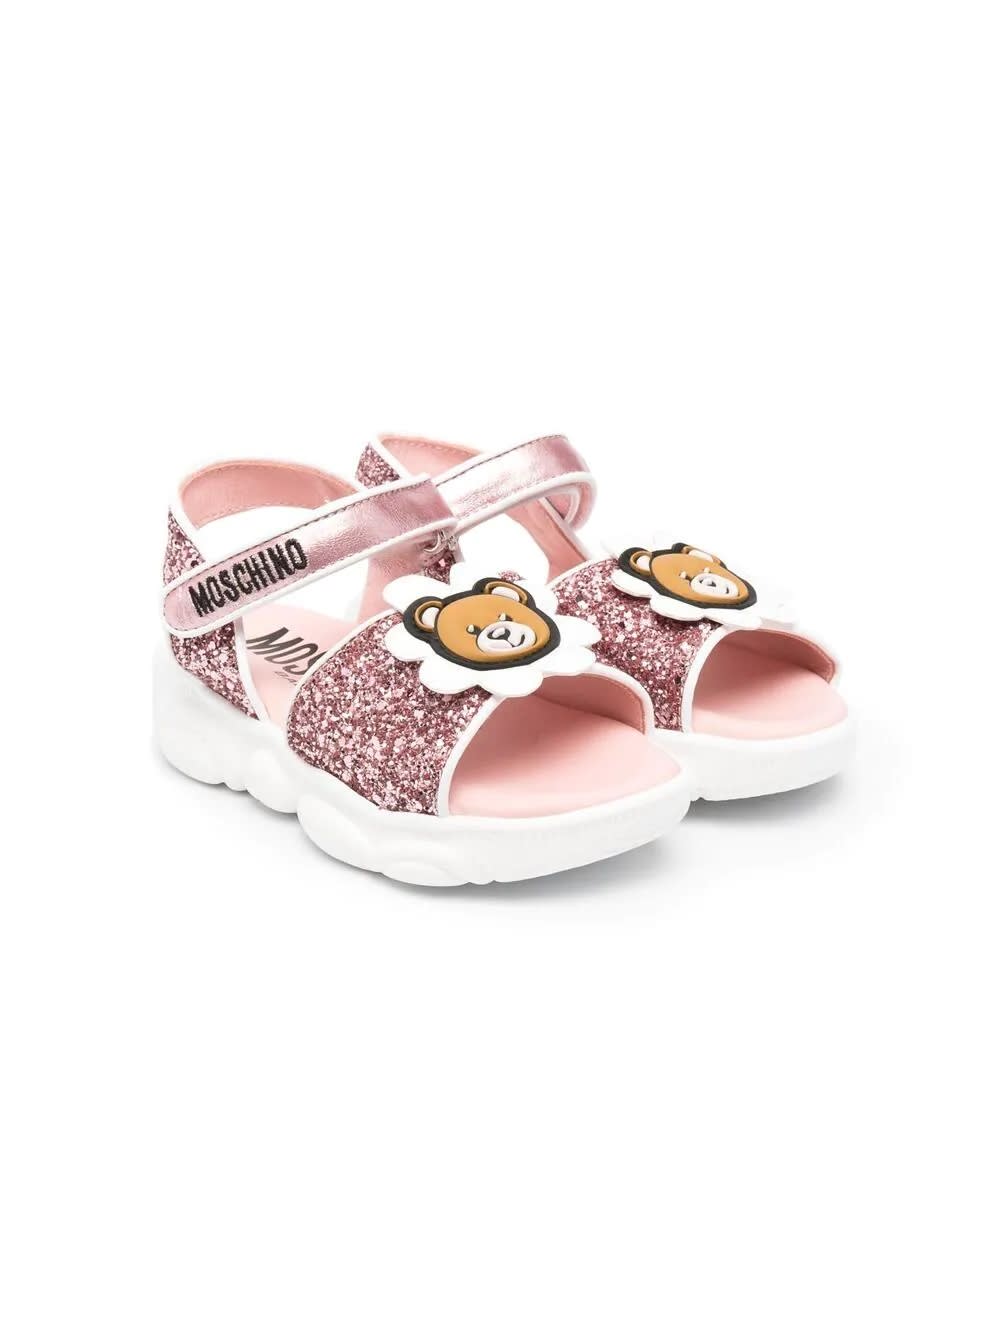 Moschino Kids' Sandals With Applications In Pink